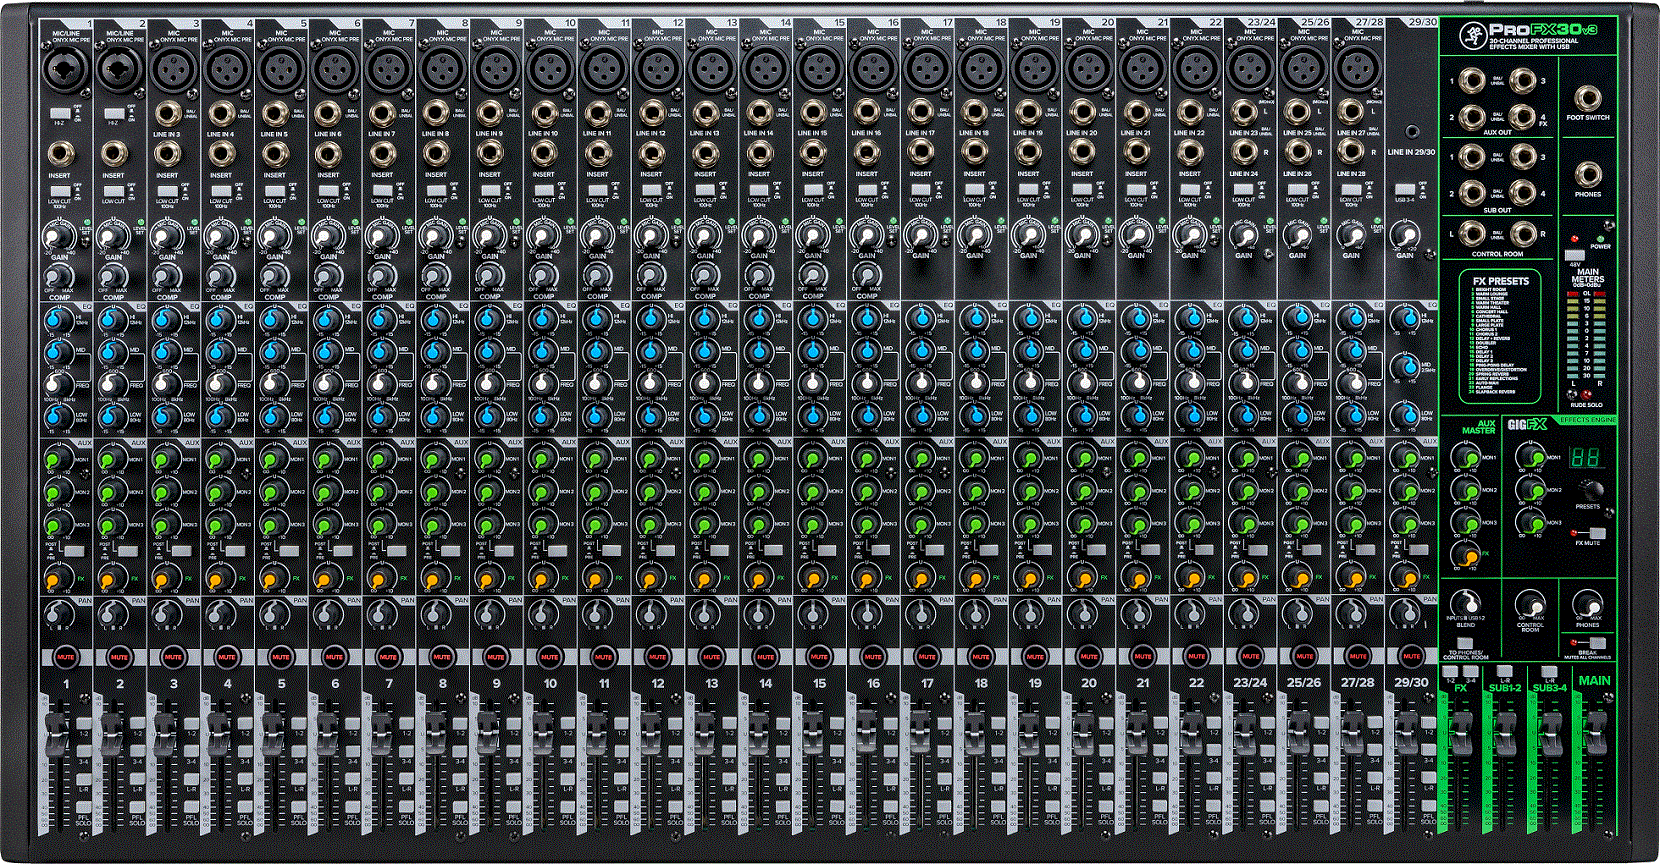 Mackie ProFX30v3 30 Channel 4-bus Professional Effects Mixer with USB - Aron Soitin